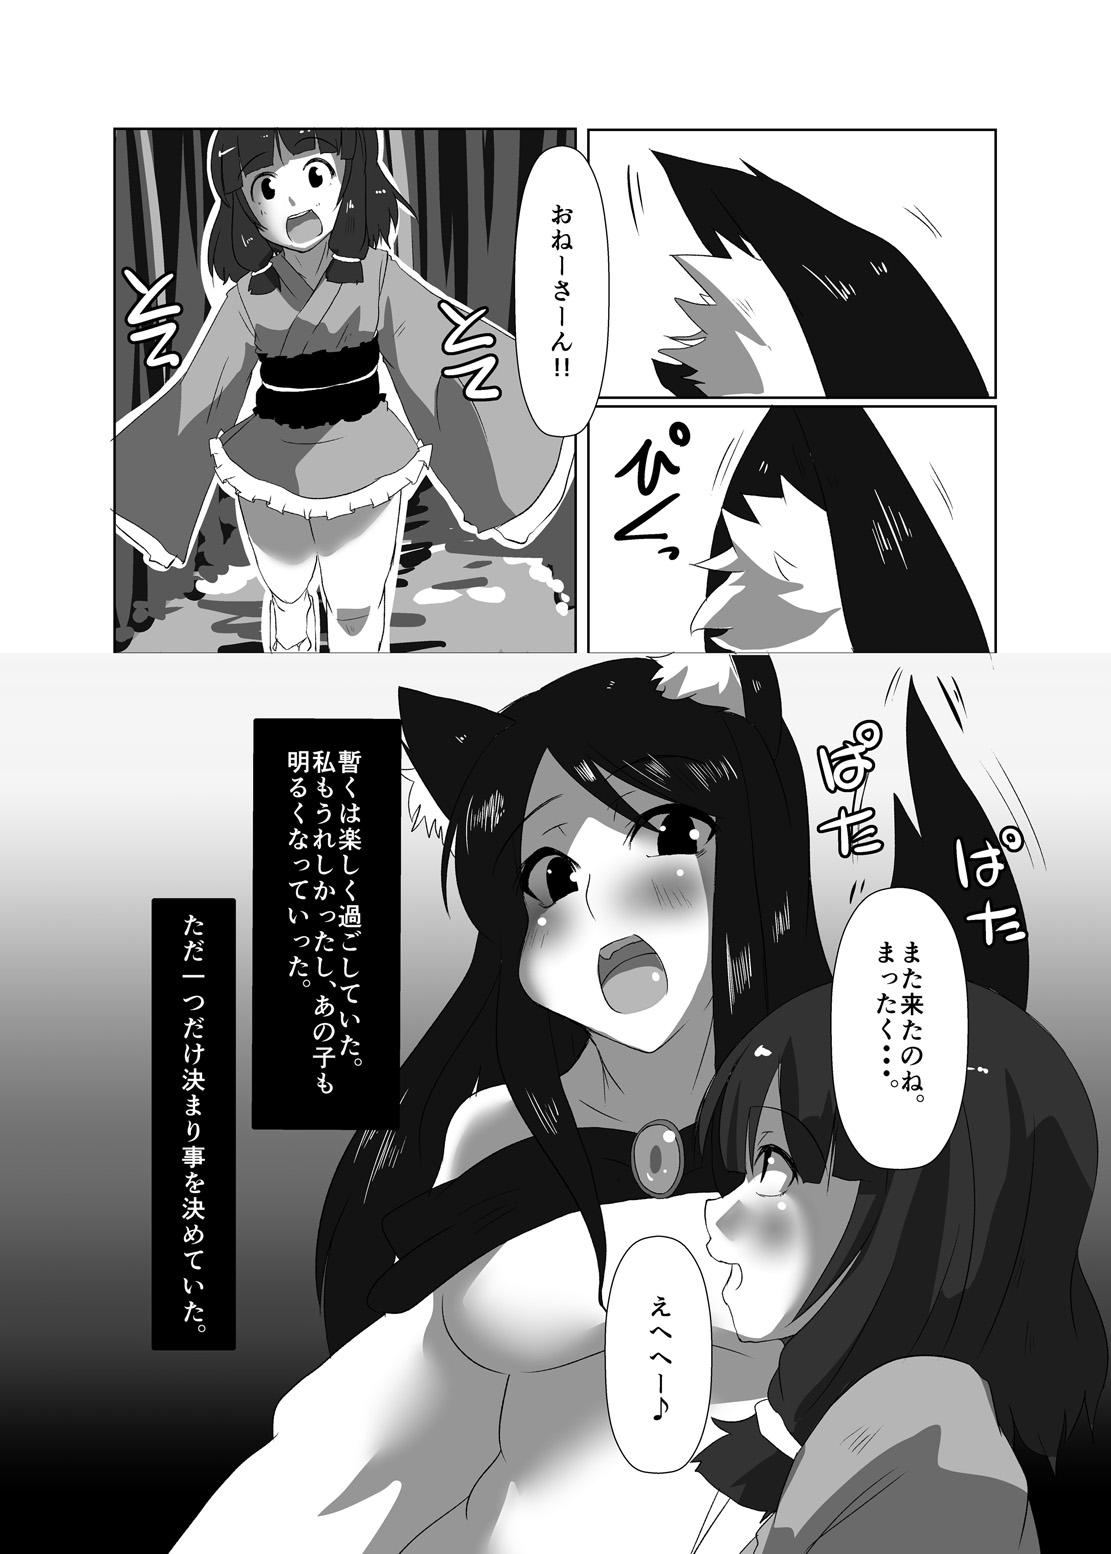 Buceta ELonely Wolf no Onee-san - Touhou project Hot Naked Girl - Page 12